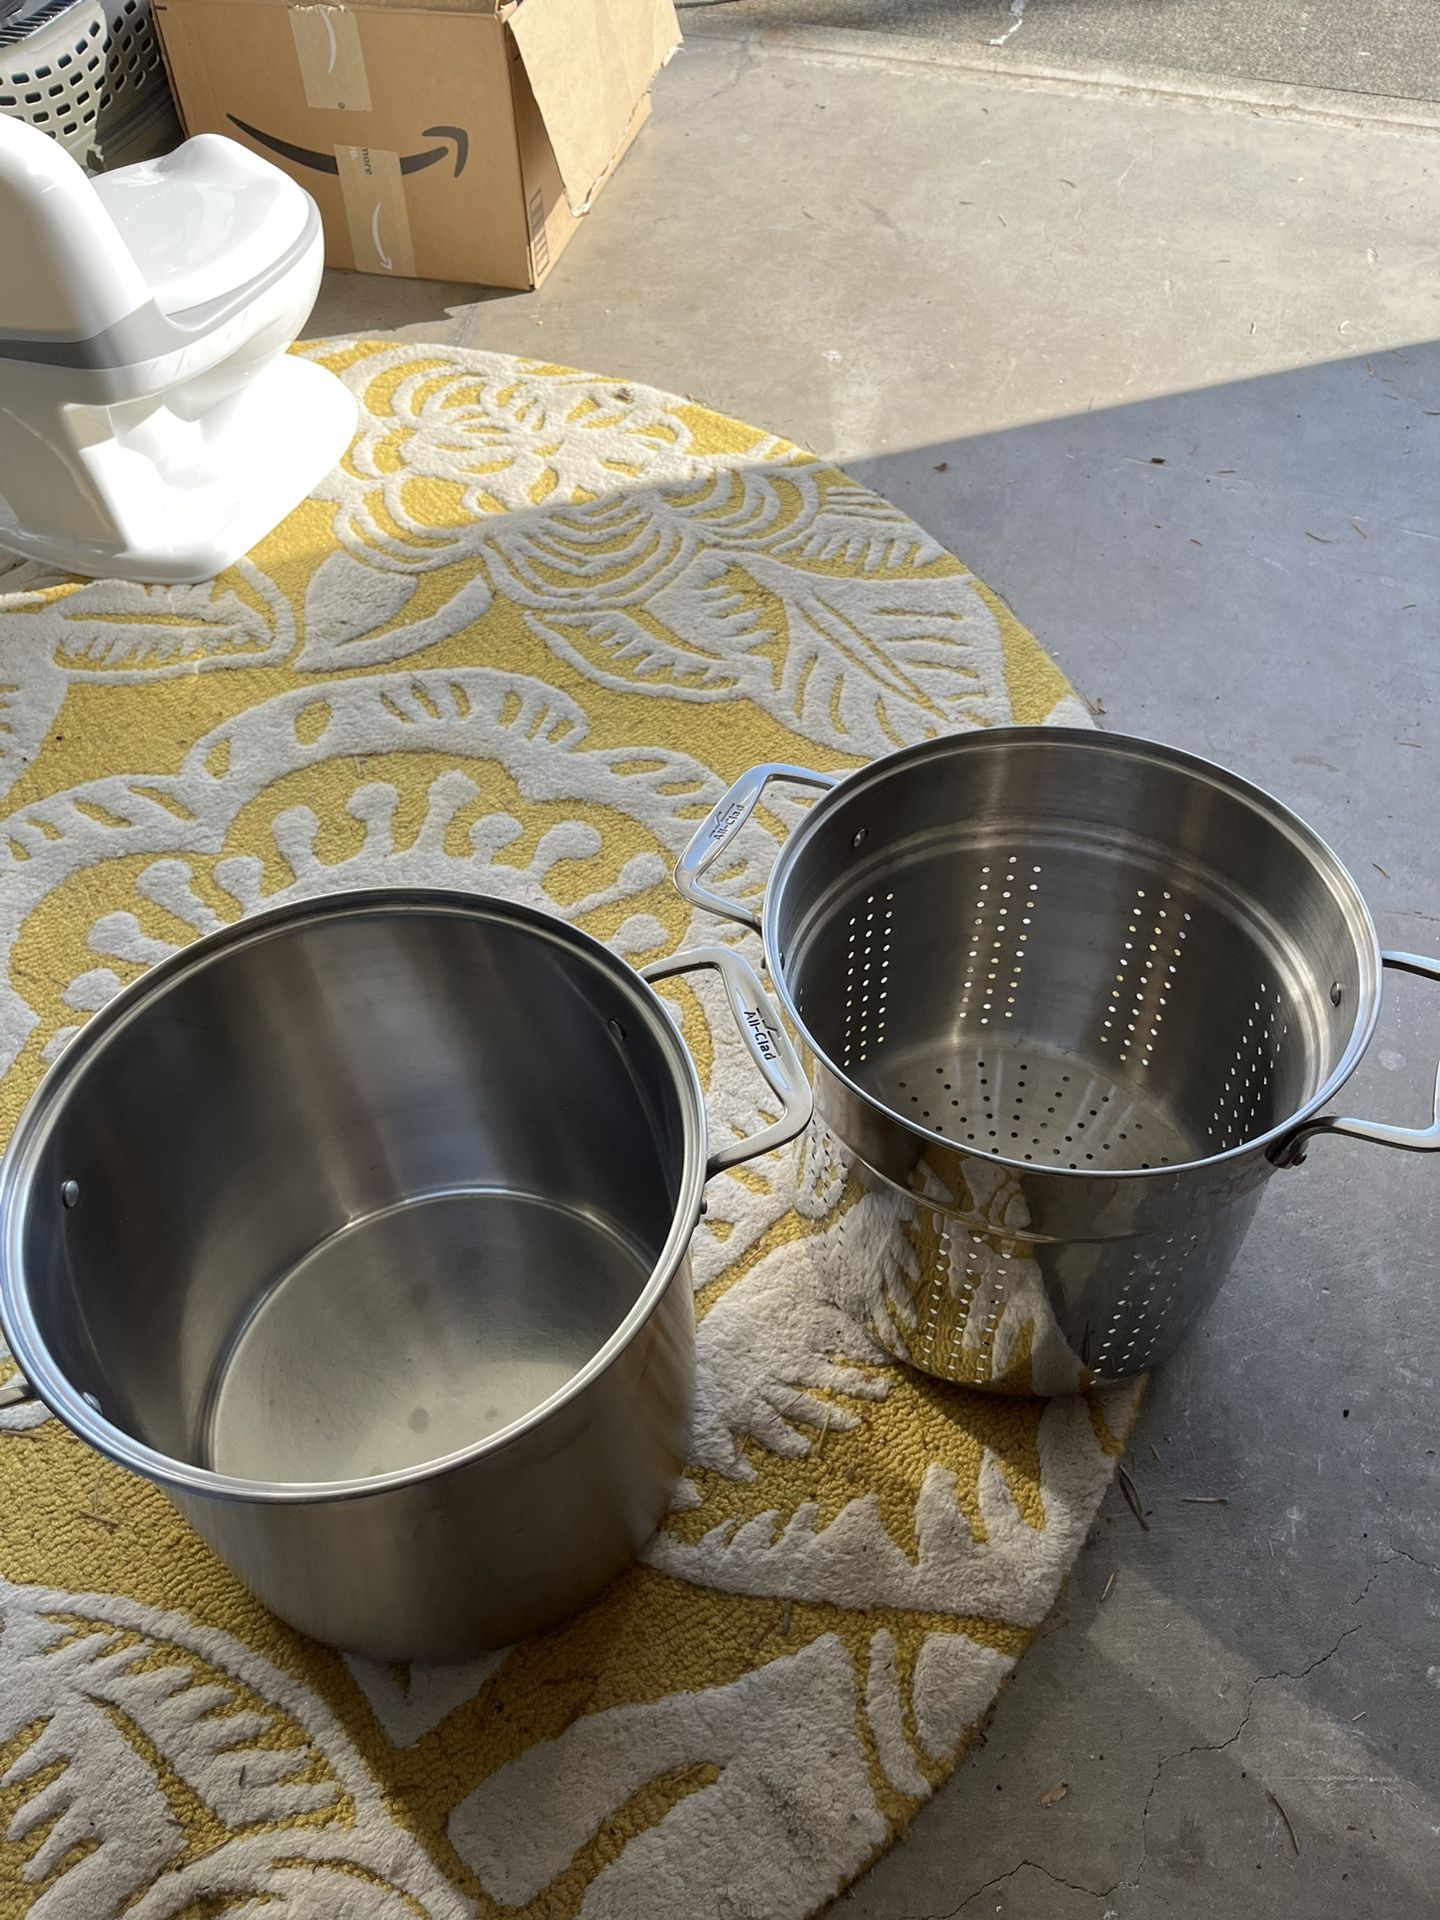 All-Clad Pasta Pot w/ Strainer - 13 Quart for Sale in Seattle, WA - OfferUp